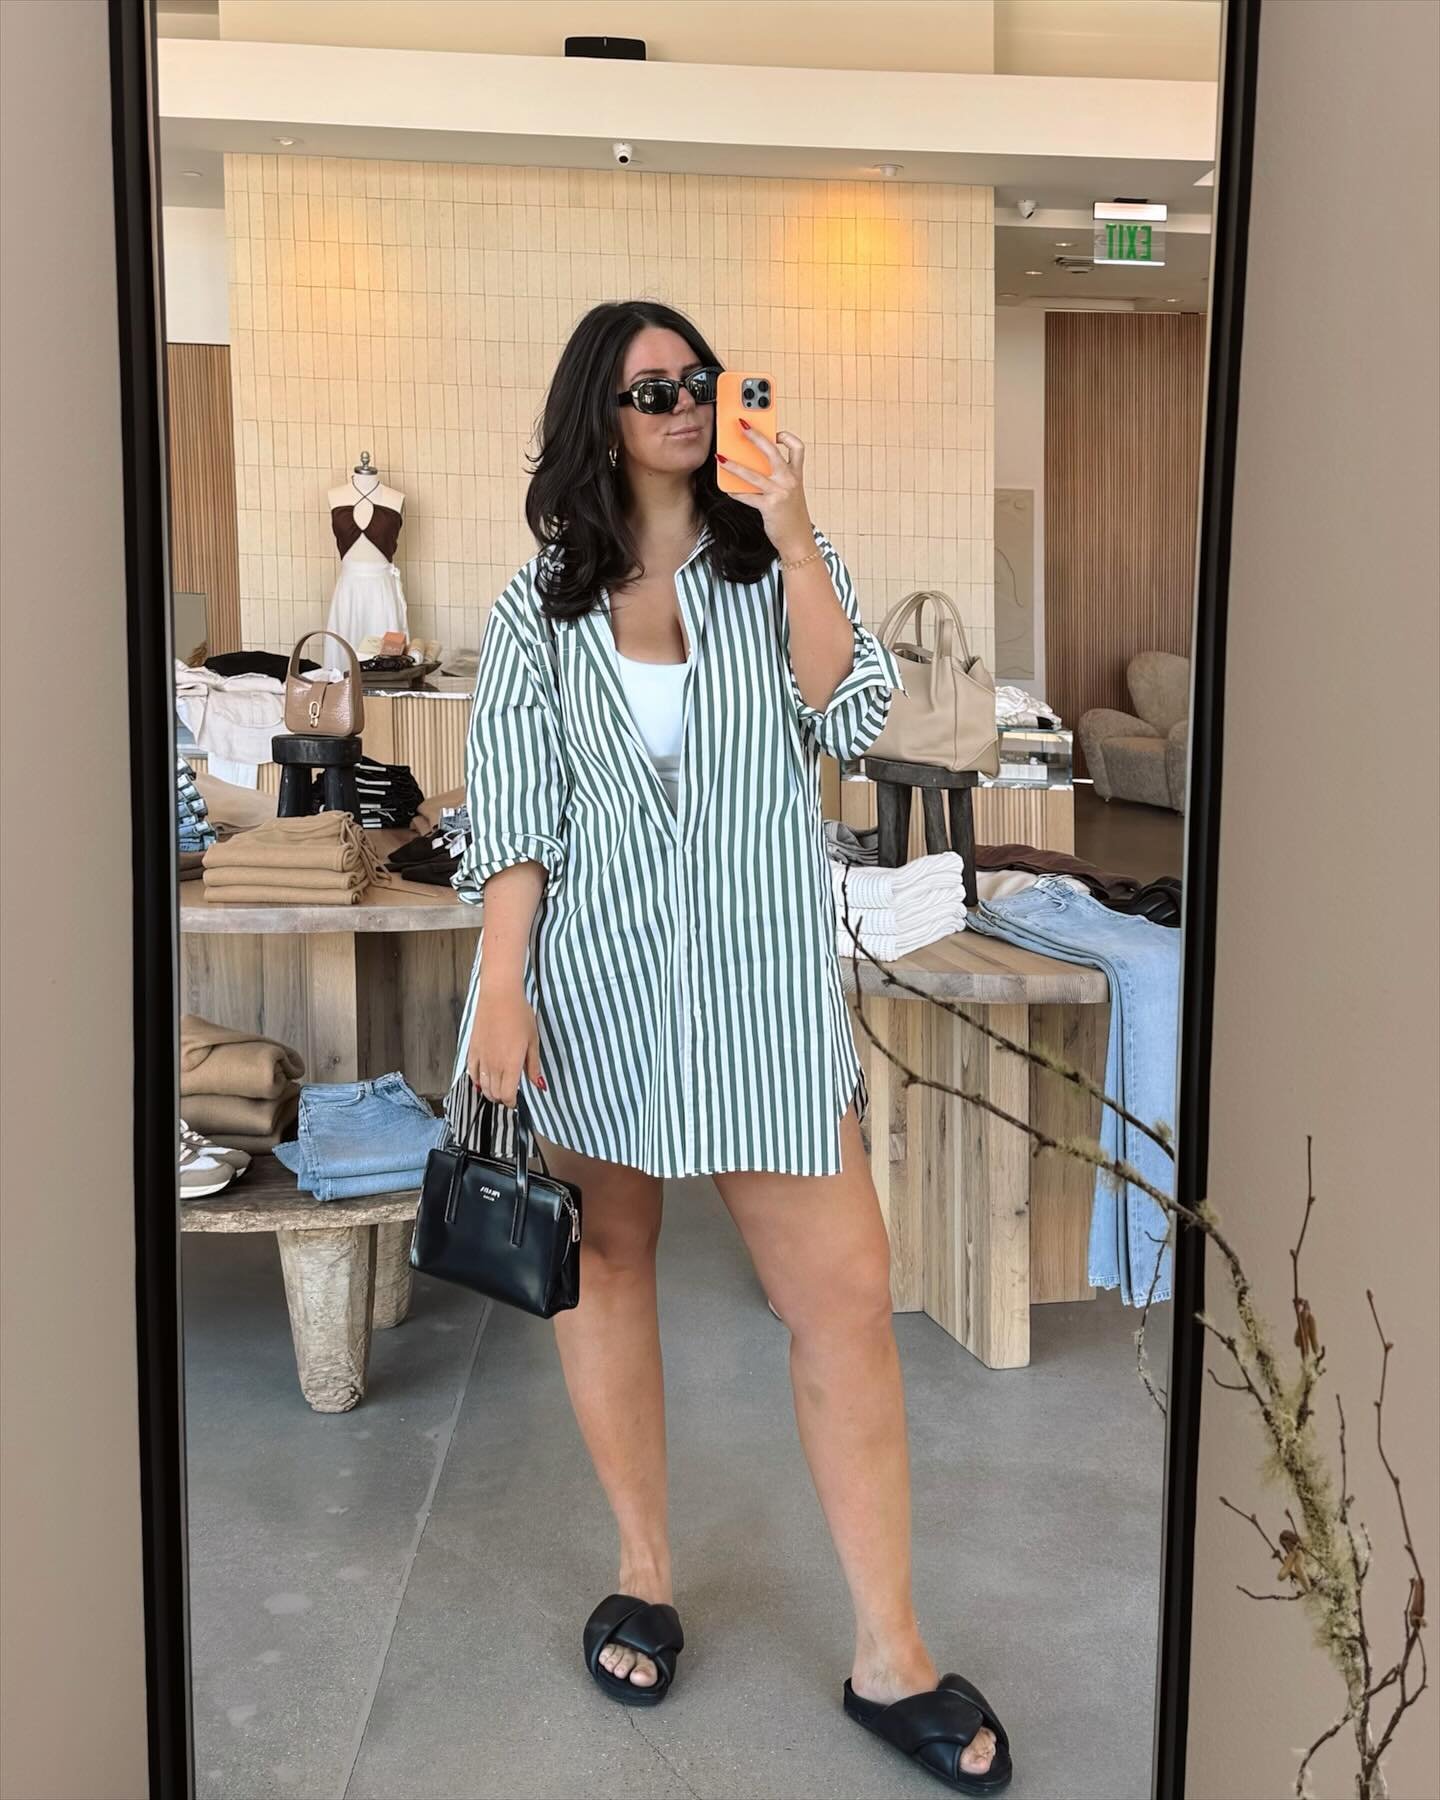 not exaggerating when I say that making the switch to renting my wardrobe instead of buying new clothes has literally changed my LIFE!!! swipe ➡️ for some of my fave palm springs looks, all RENTED from @nuuly!! #nuulypartner 

renting is more fun AND